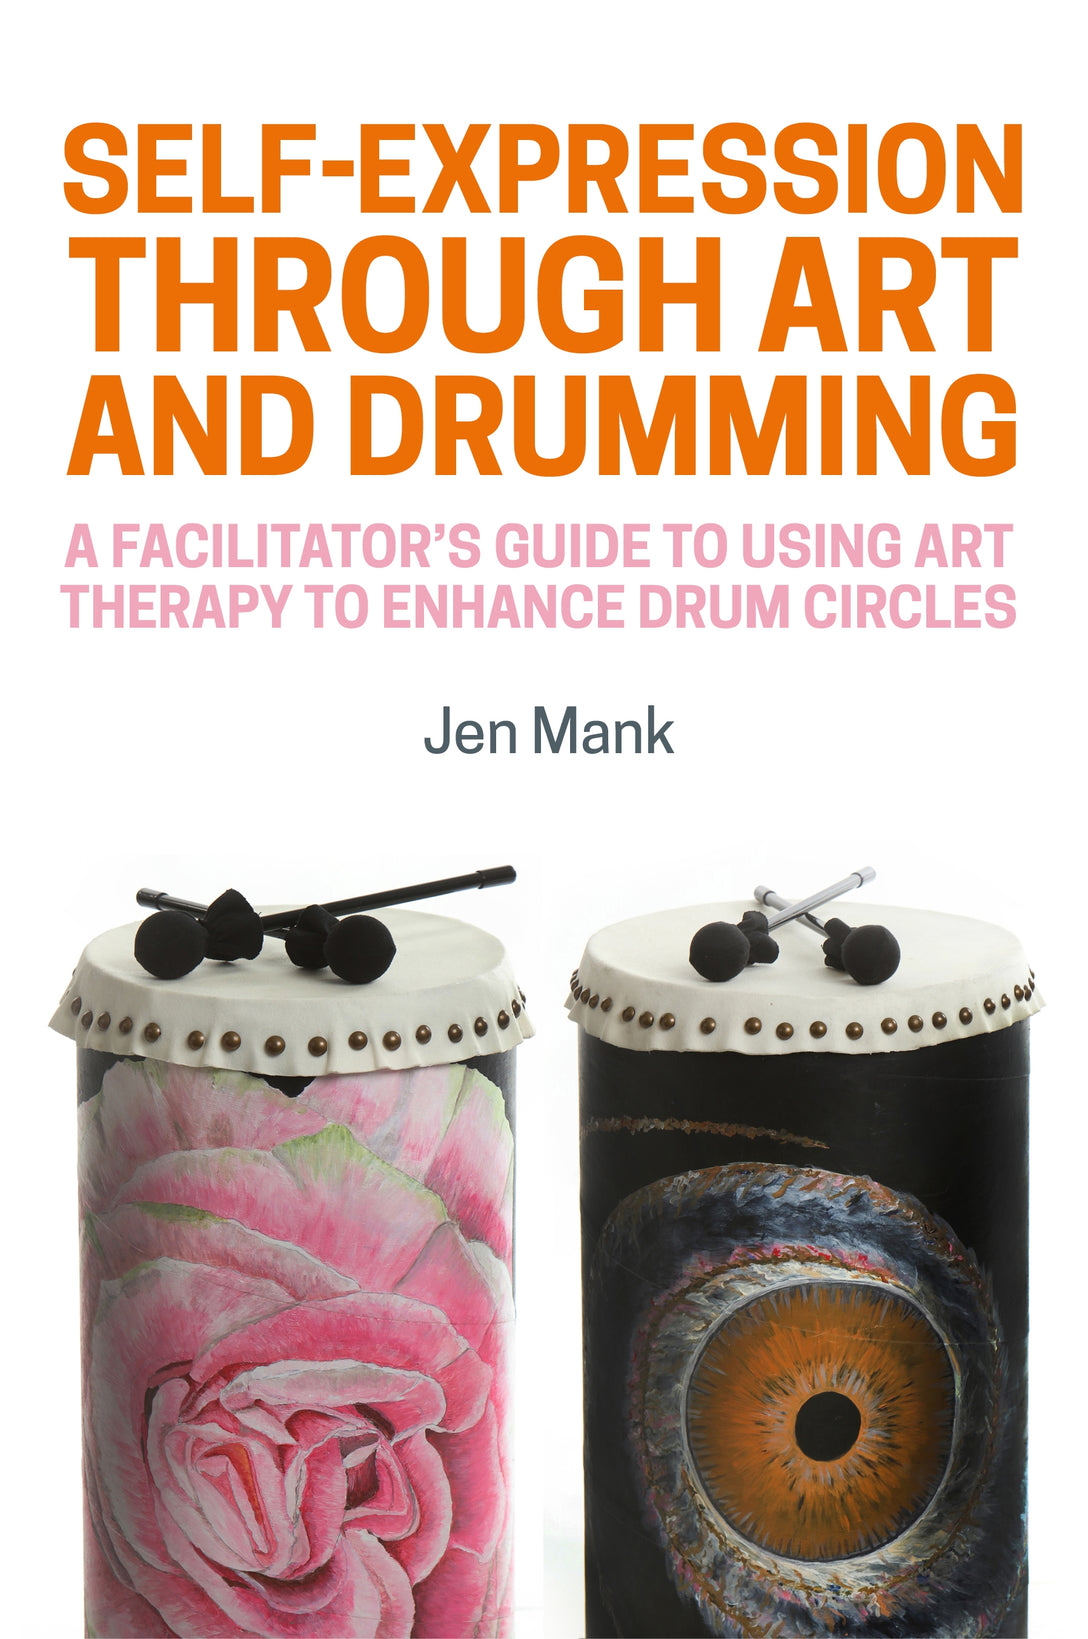 Self-Expression through Art and Drumming by Jen Mank